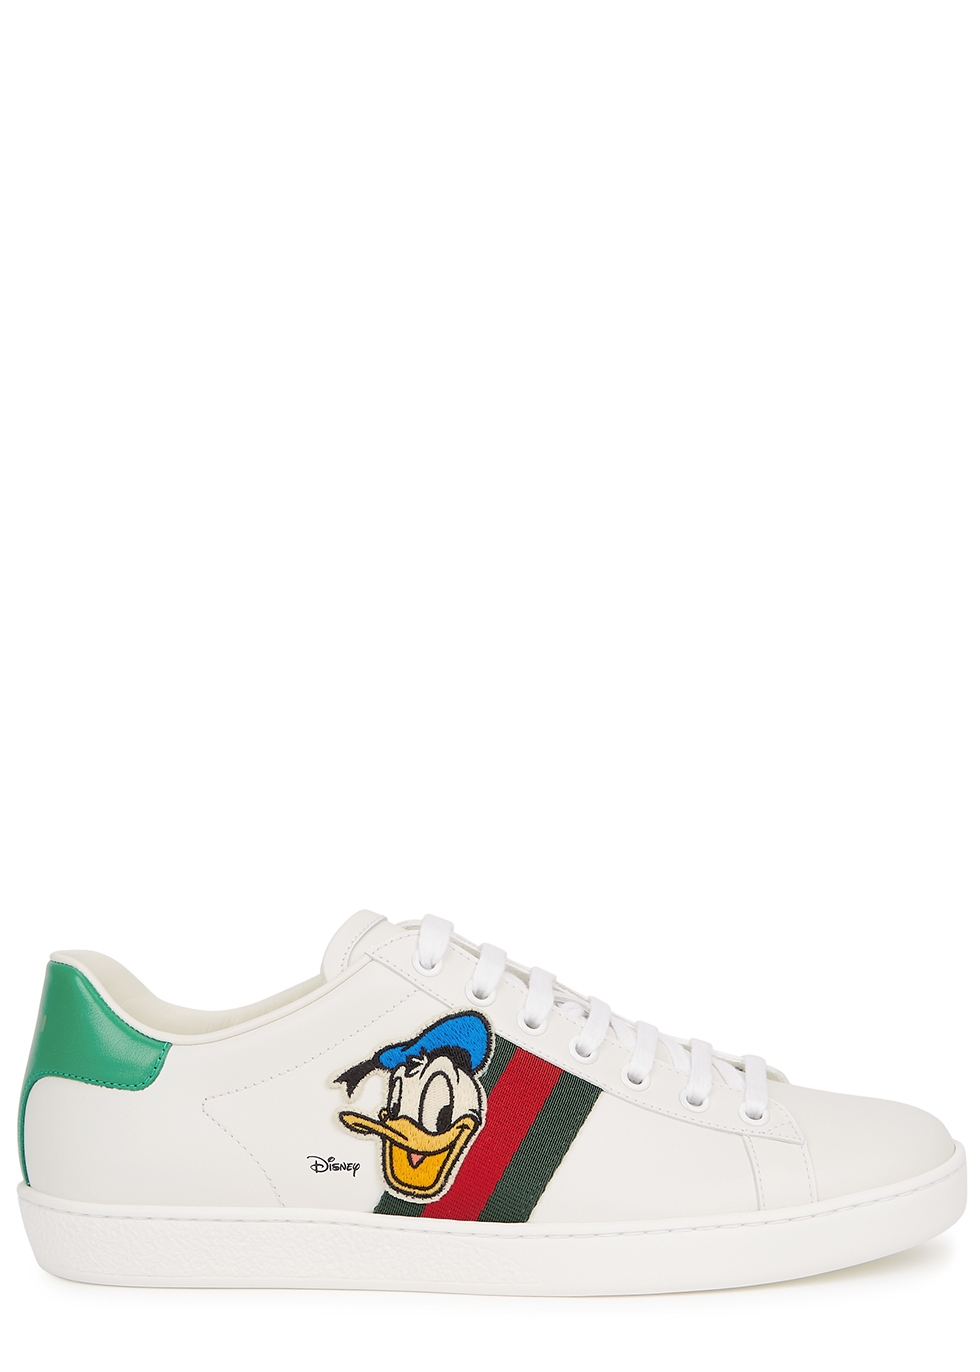 Gucci X Disney New Ace white leather 